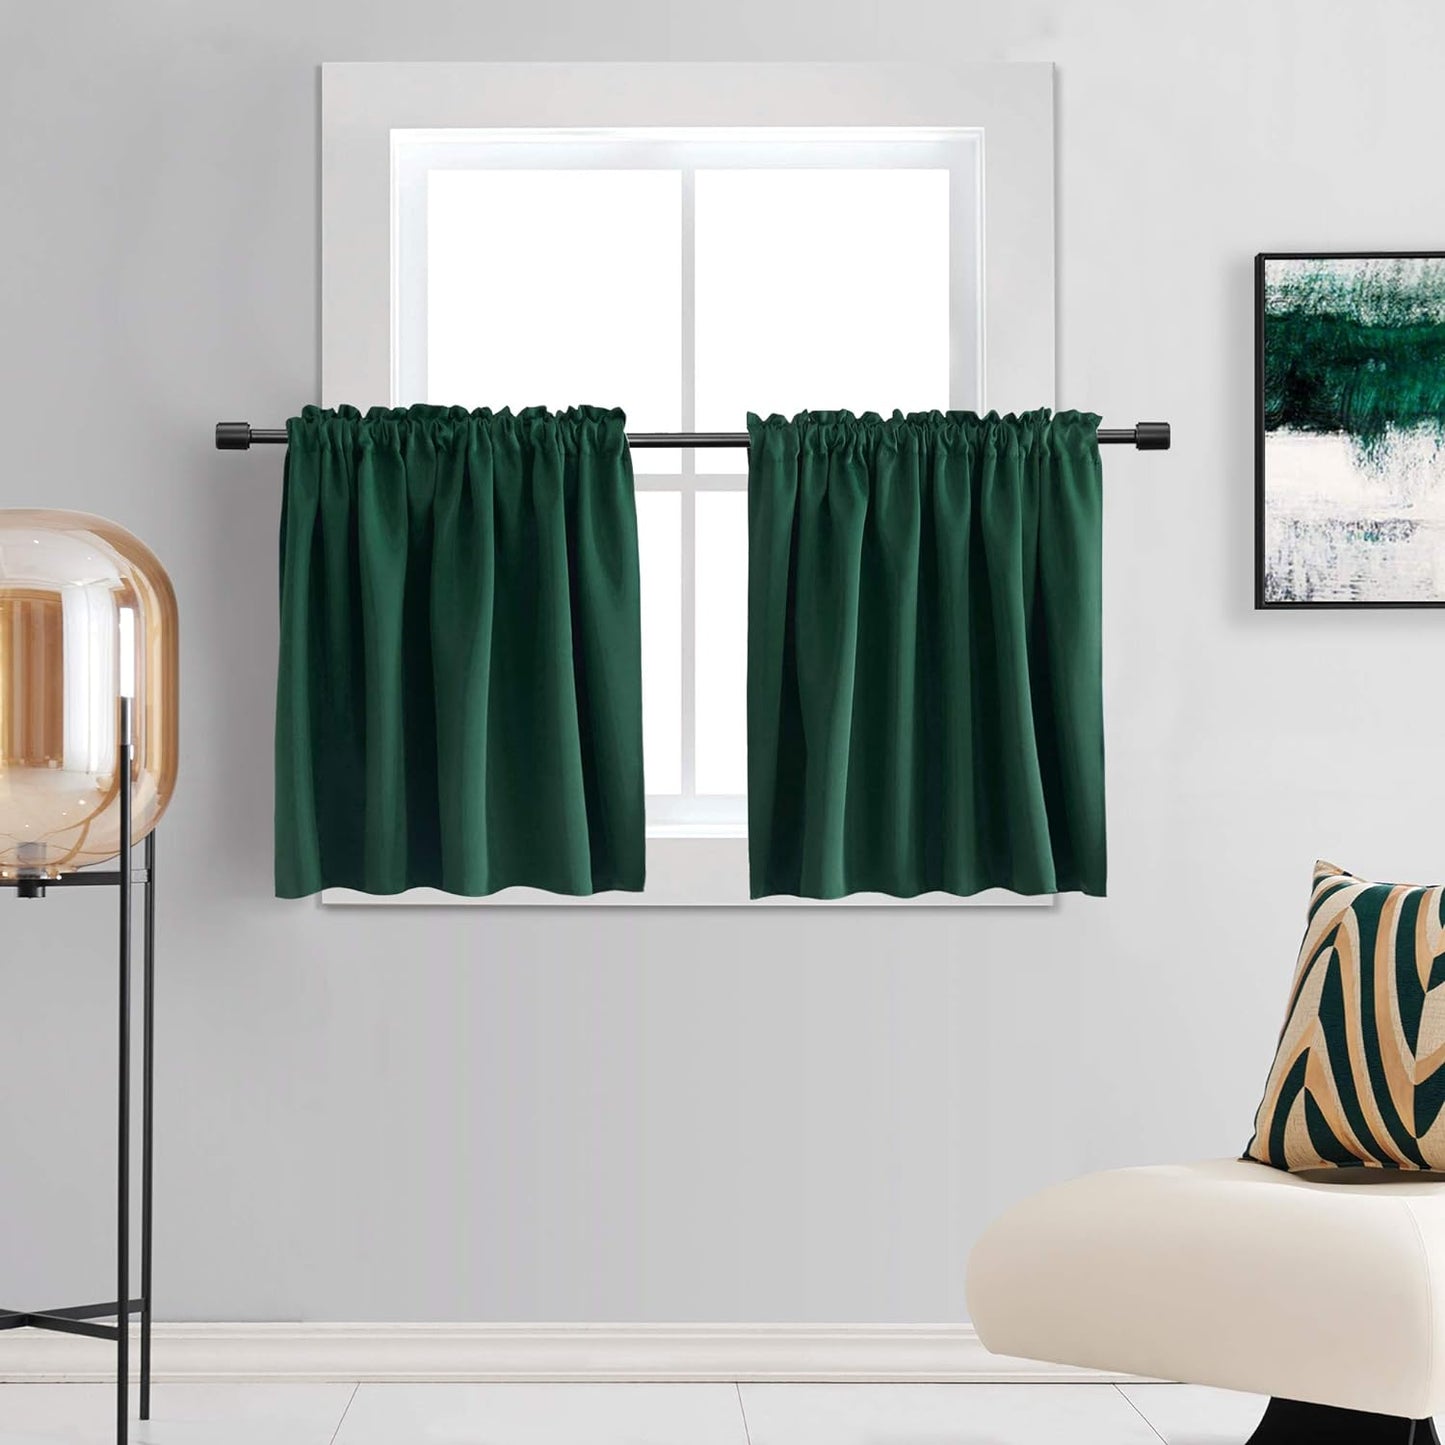 DONREN 24 Inch Length Curtains- 2 Panels Blackout Thermal Insulating Small Curtain Tiers for Bathroom with Rod Pocket (Black,42 Inch Width)  DONREN Hunter Green 42" X 24" 